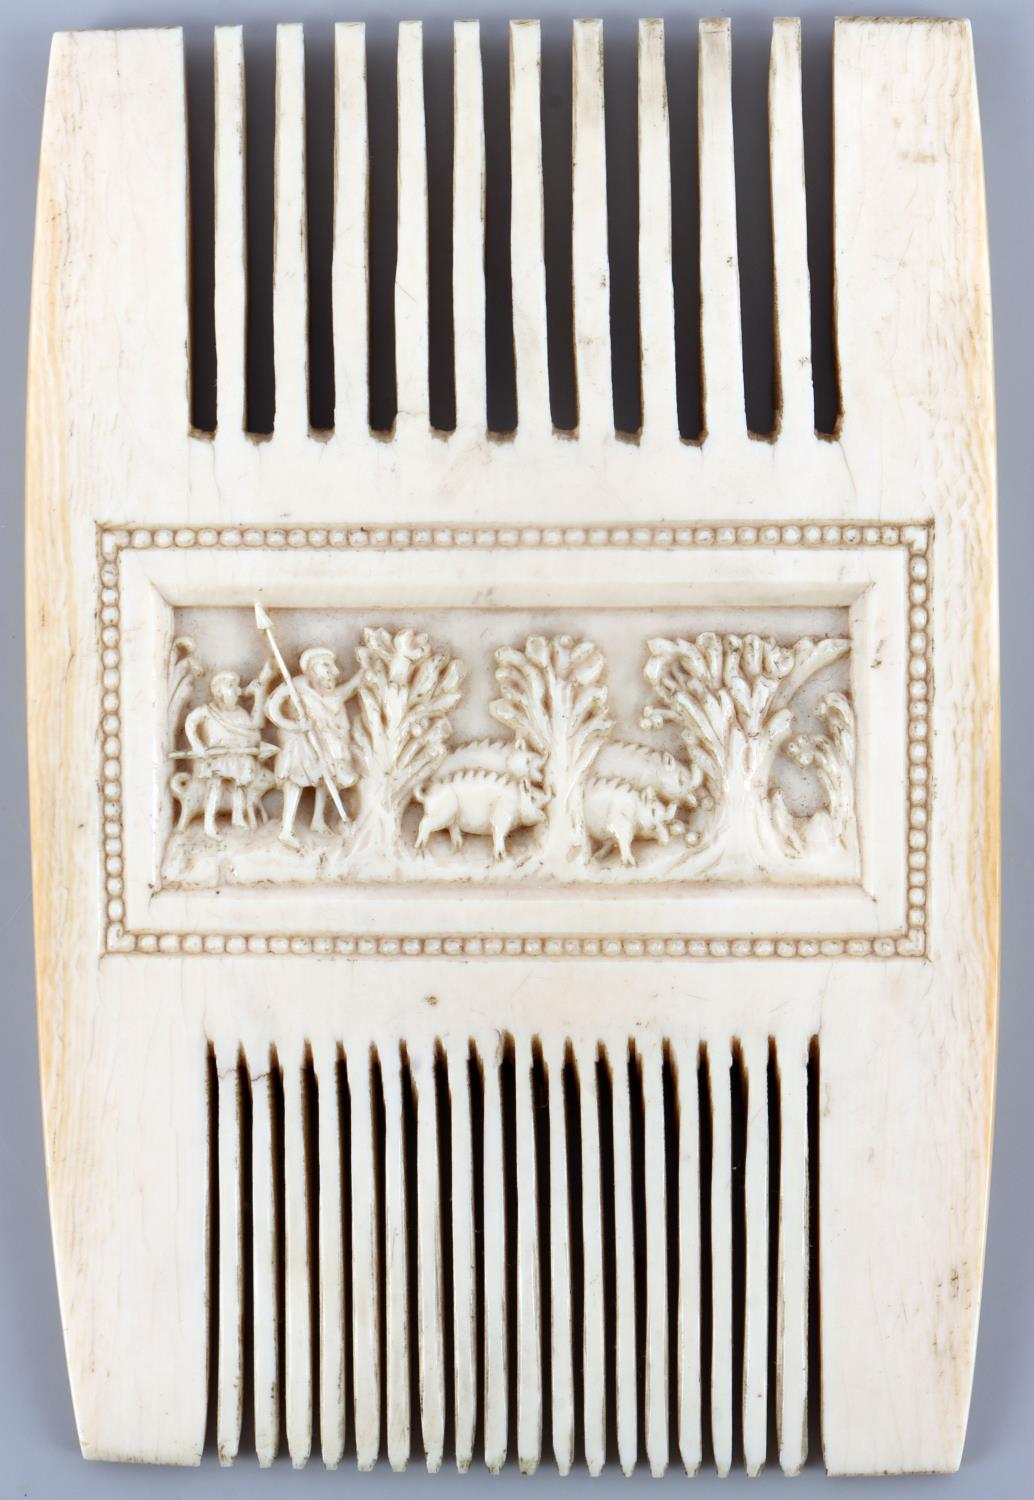 MEDIEVAL IVORY LITURGICAL COMB W/ HUNTING SCENES